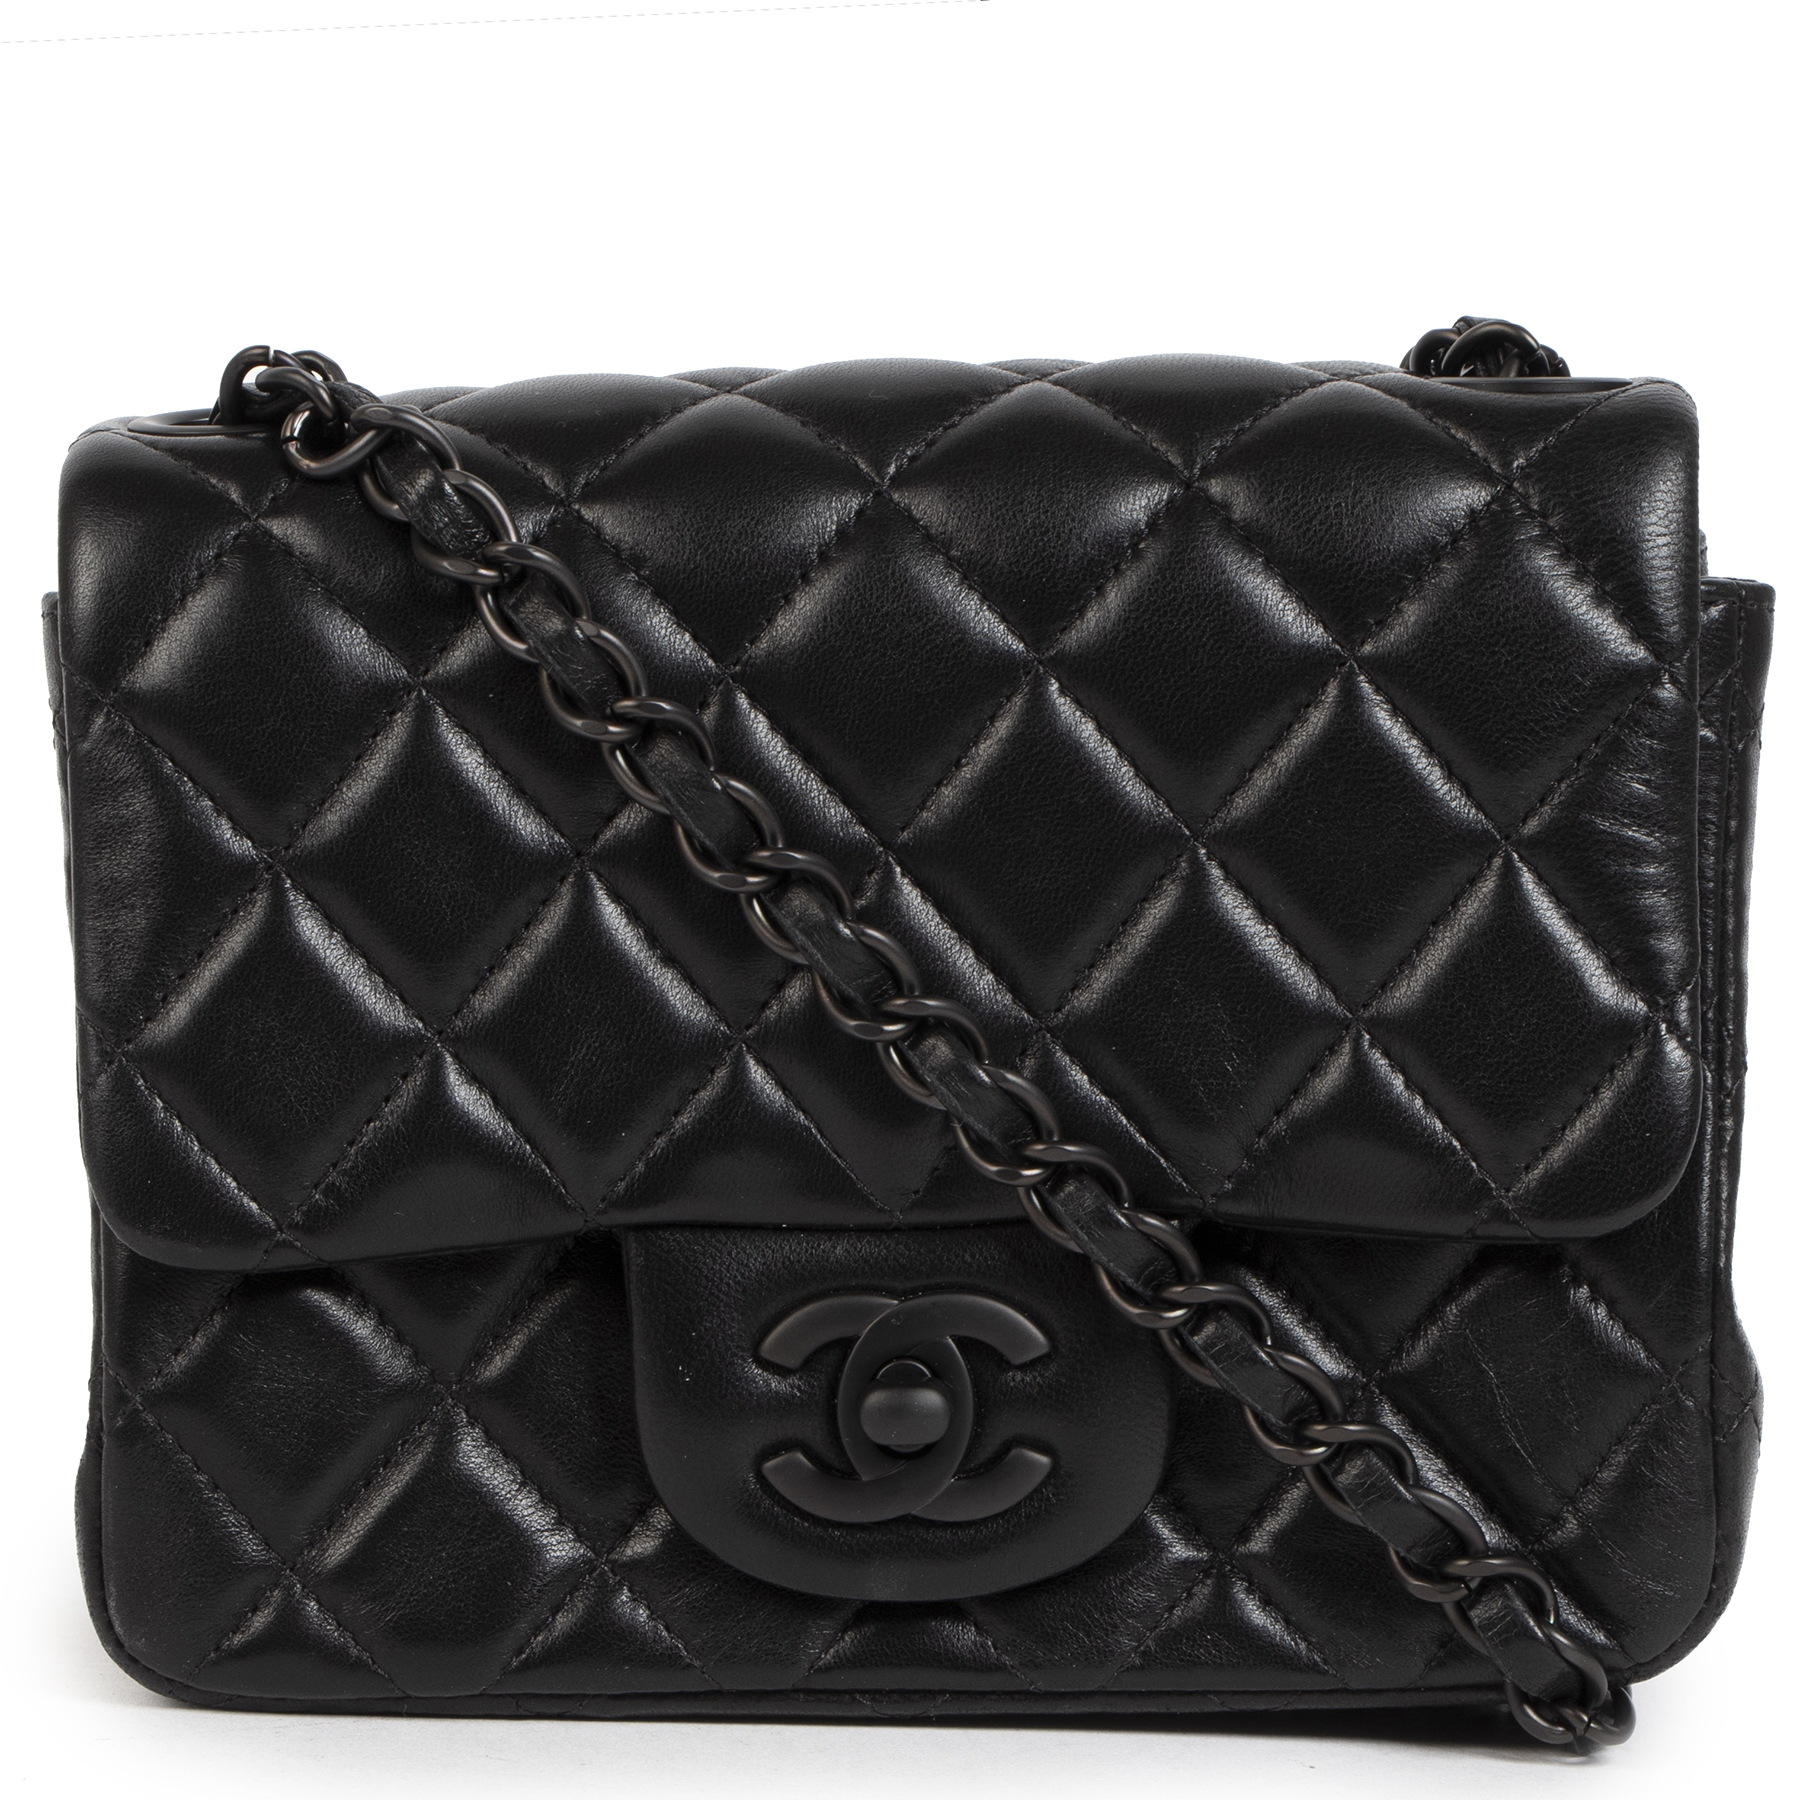 Chanel 2.55 So Black Mini Reissue in Chevron Quilted Aged Black